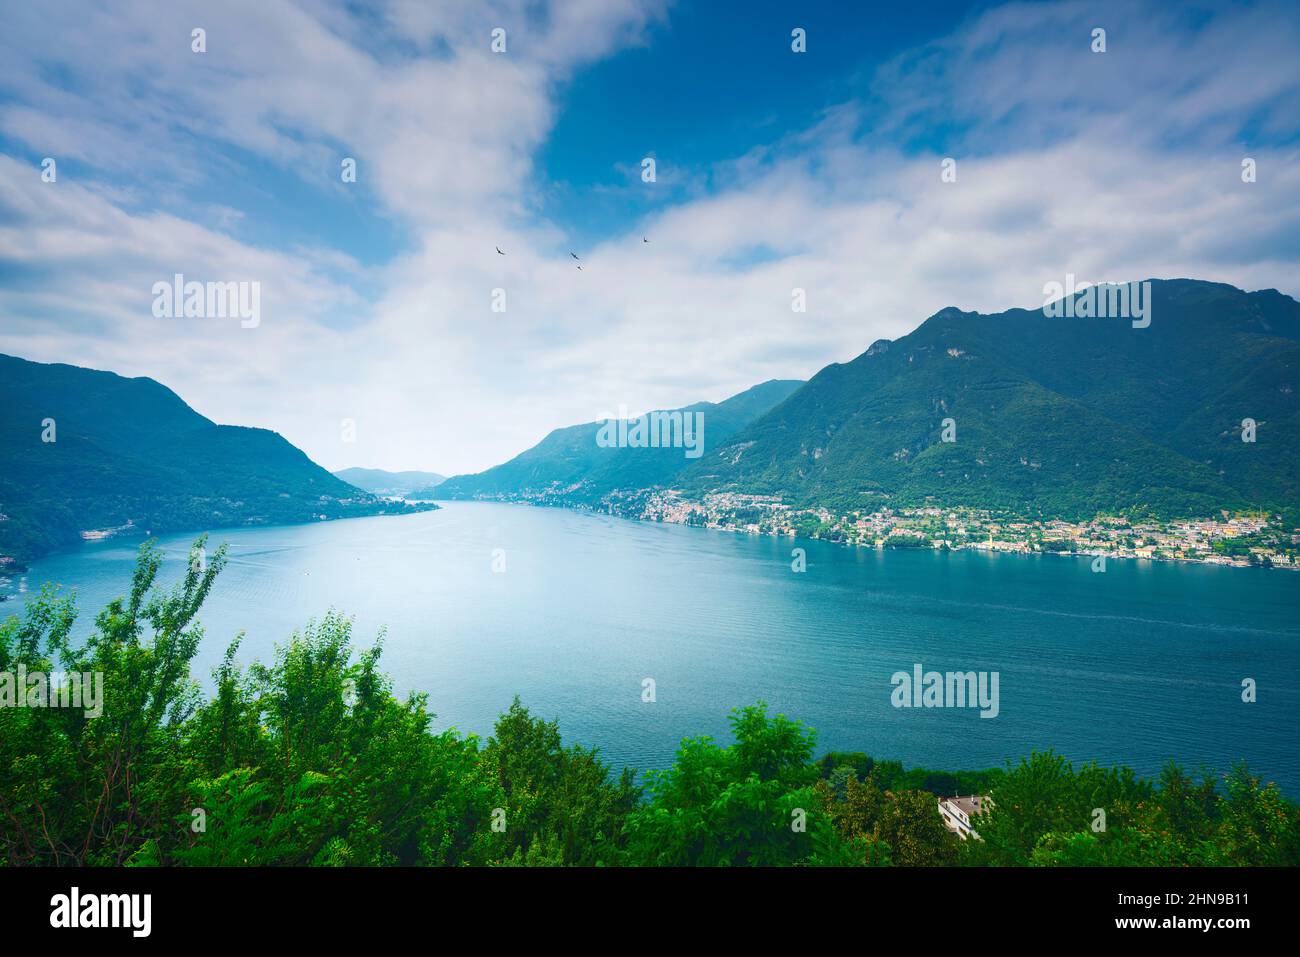 Como Lake landscape. Aerial view, trees, water and mountains. Italy, Europe. Stock Photo